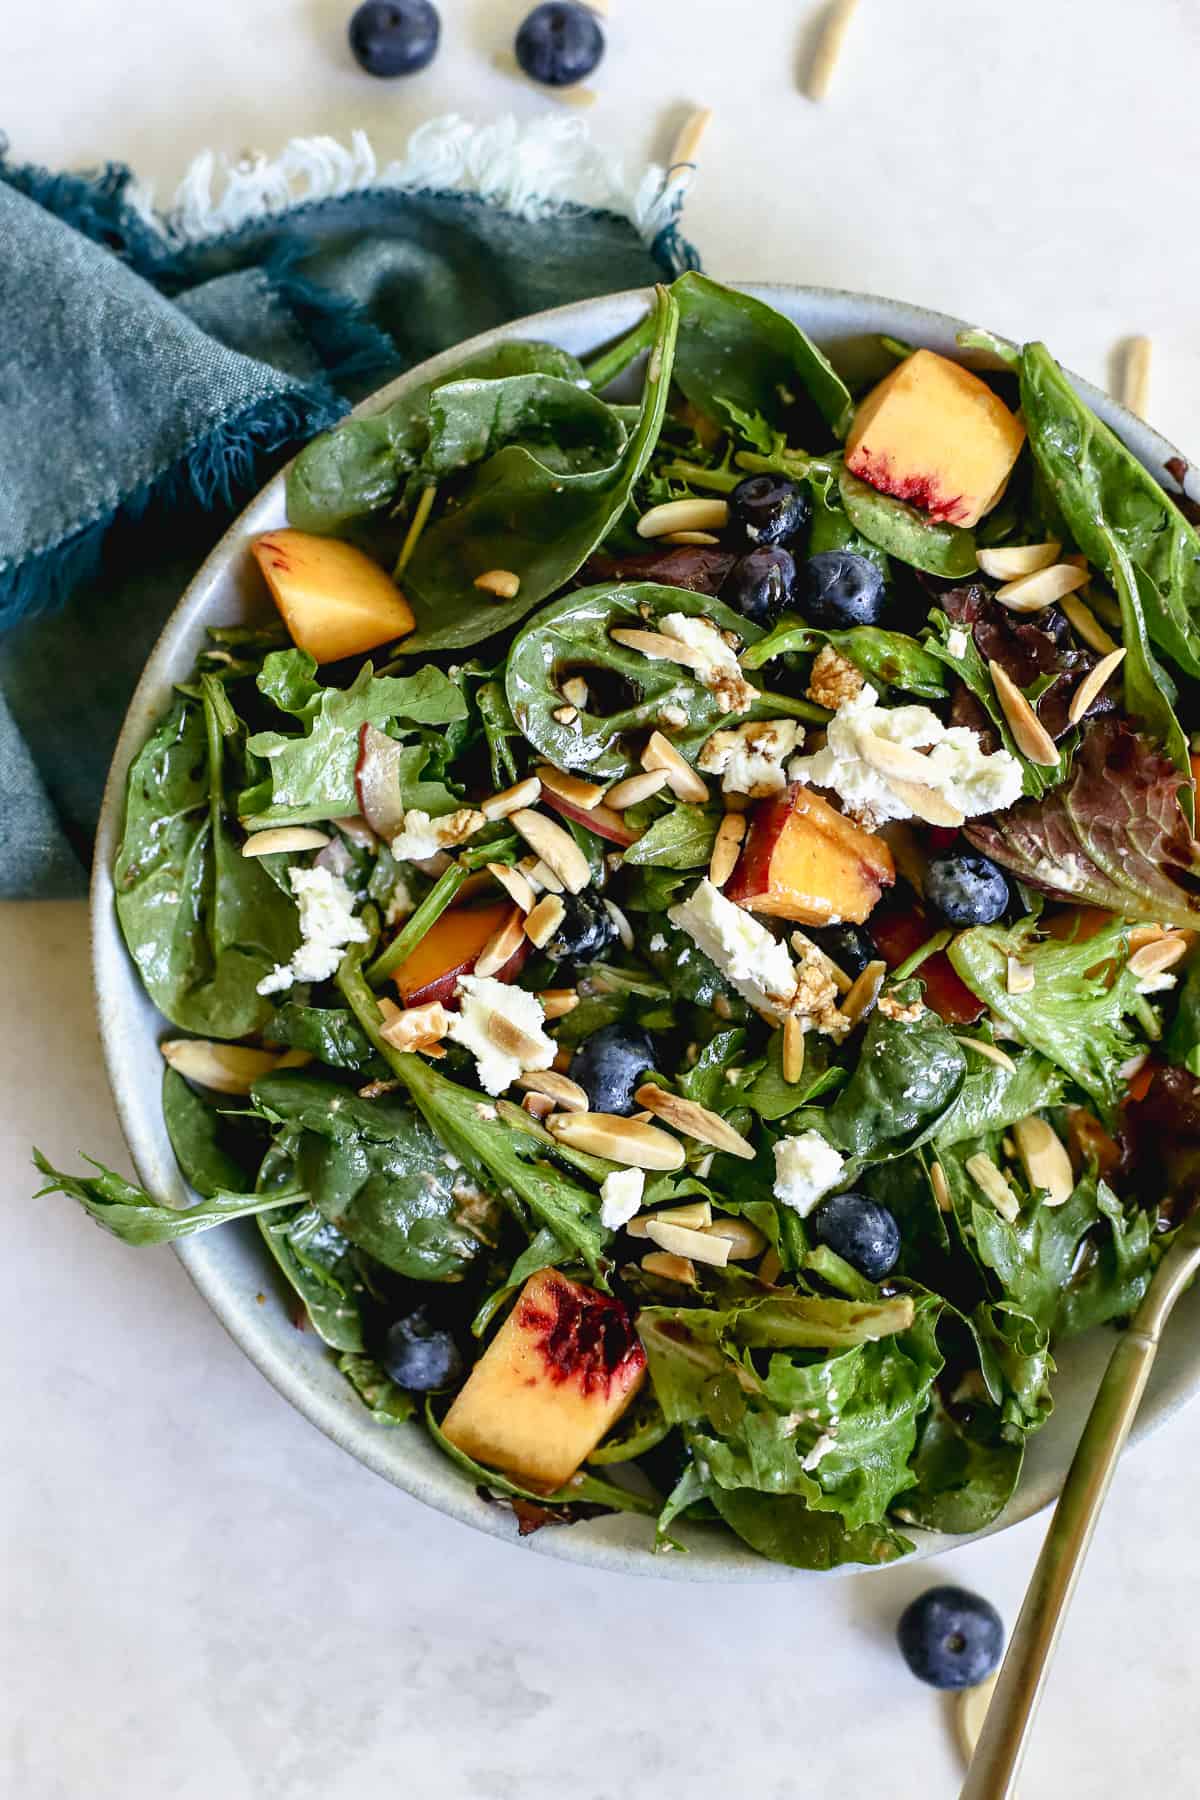 Peach blueberry salad in light blue bowl with teal linen on gray and white surface